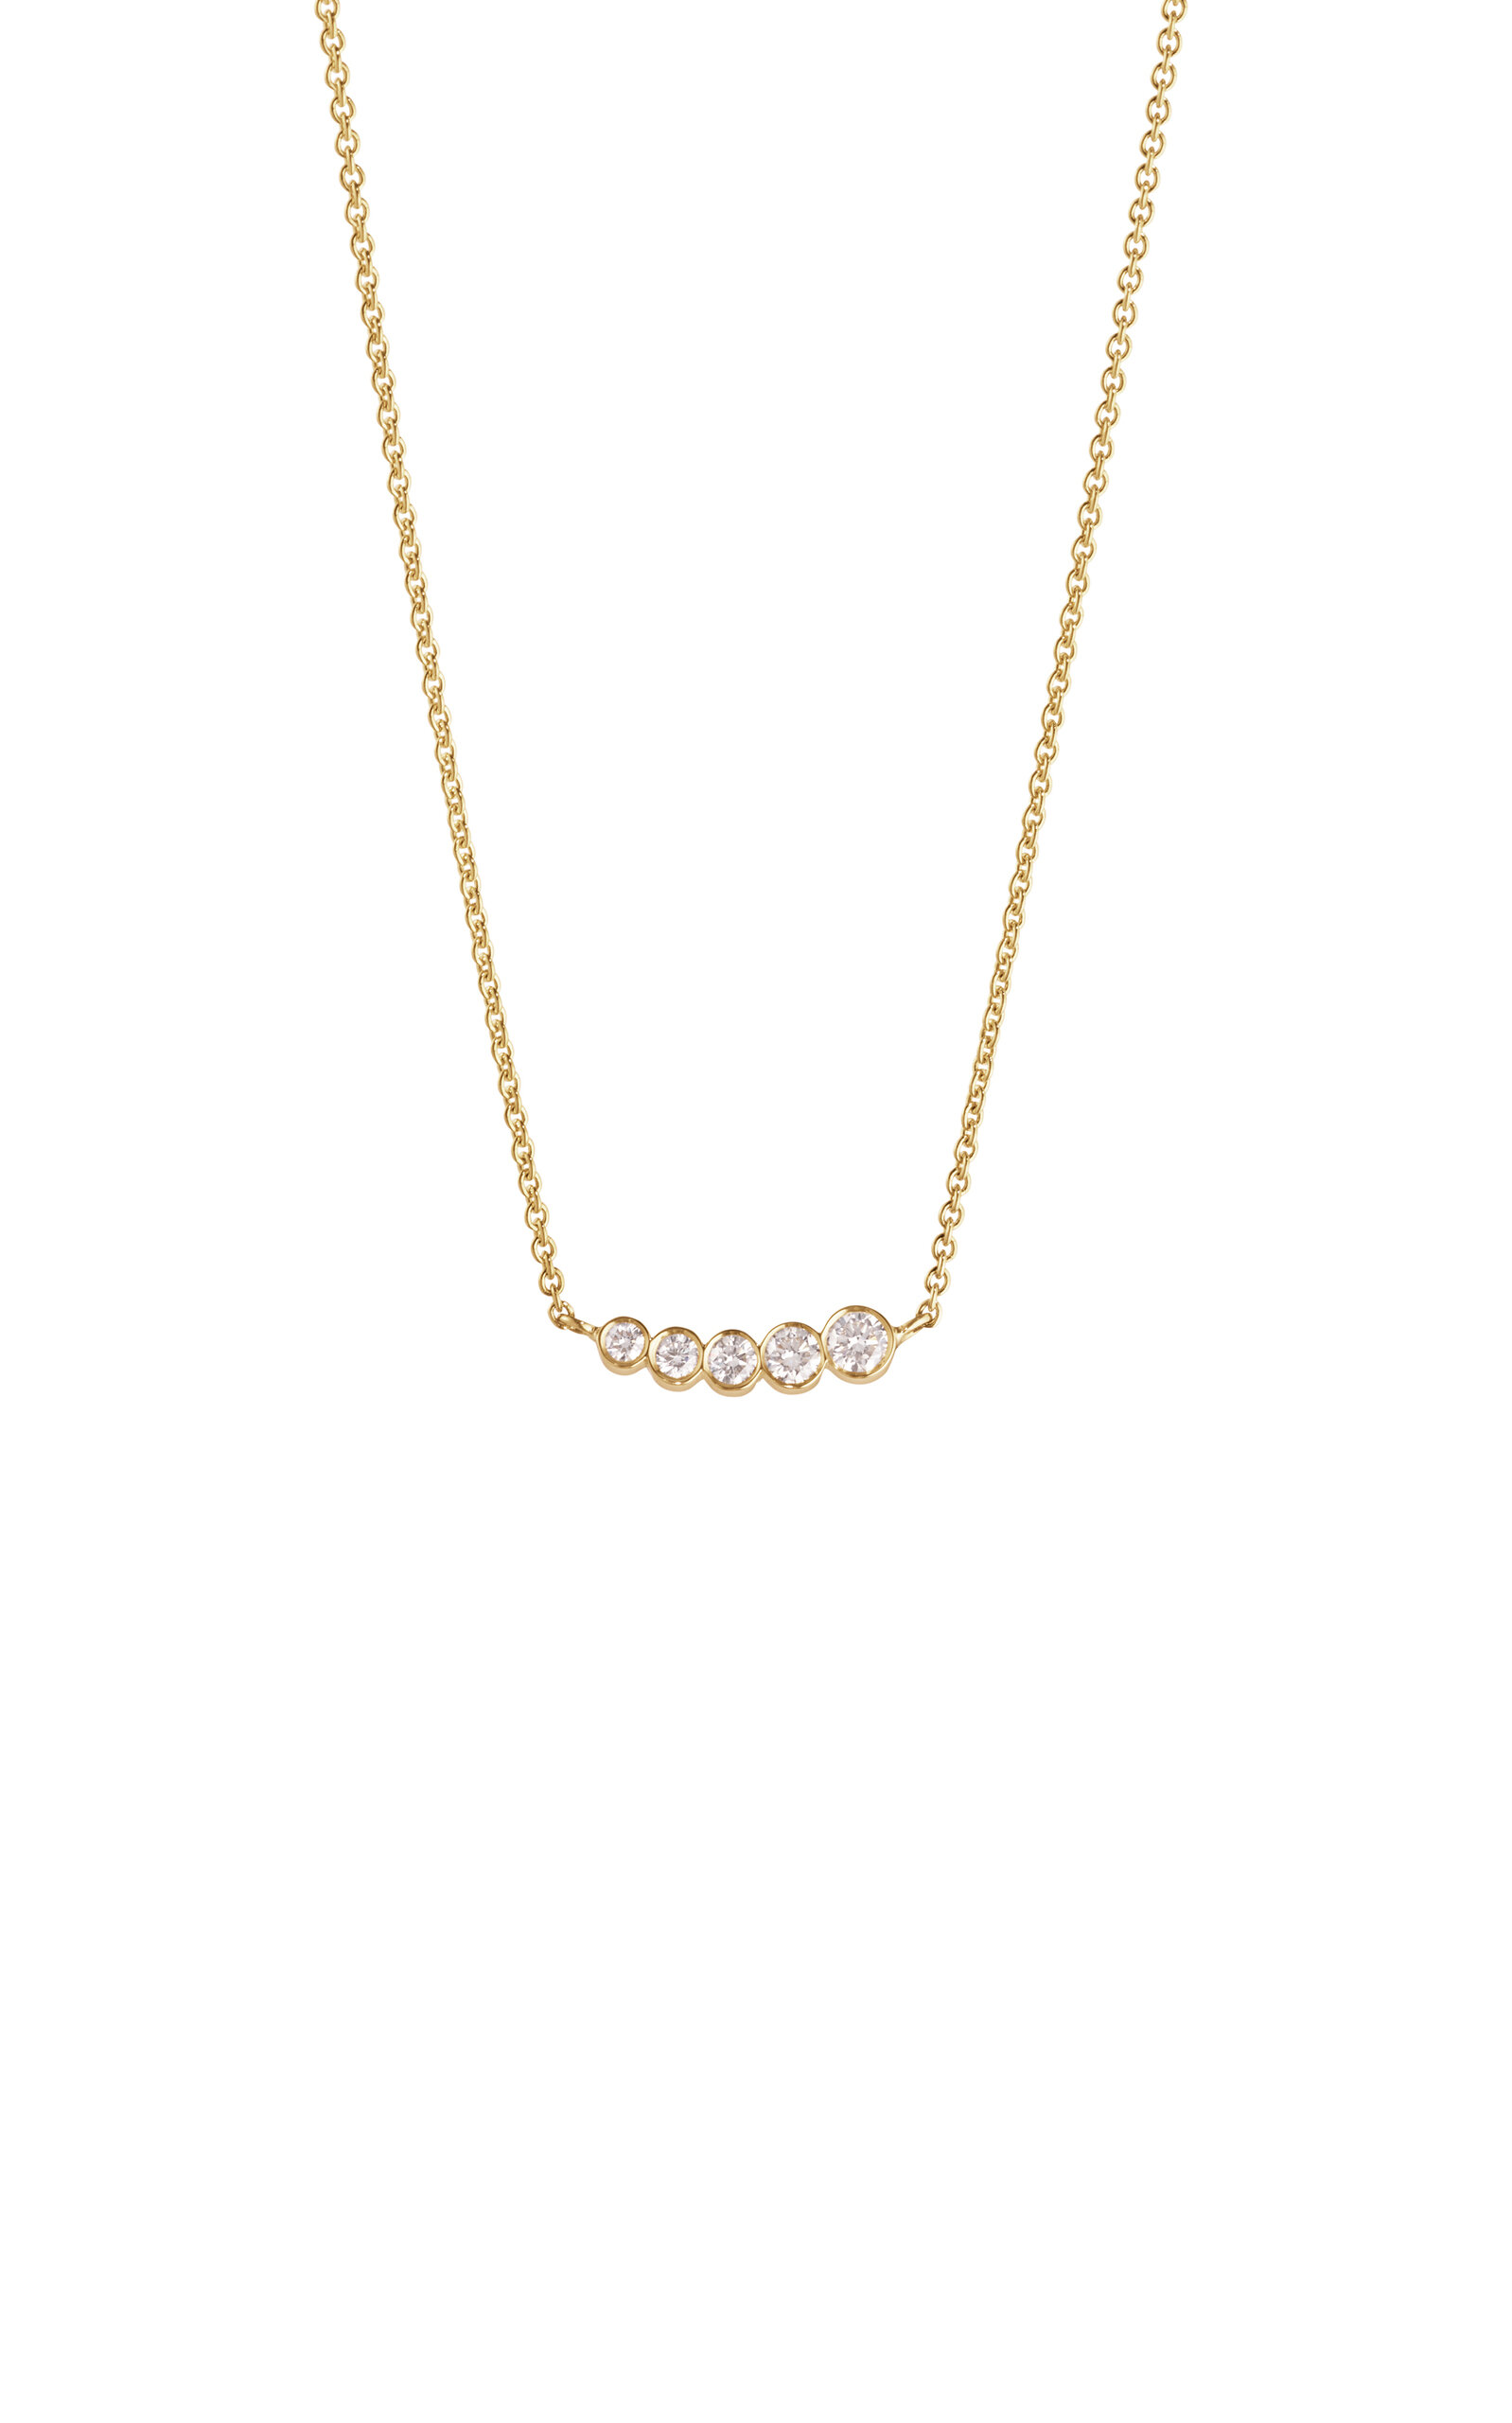 Sophie Bille Brahe Lune 18k Yellow Gold And Diamond Necklace